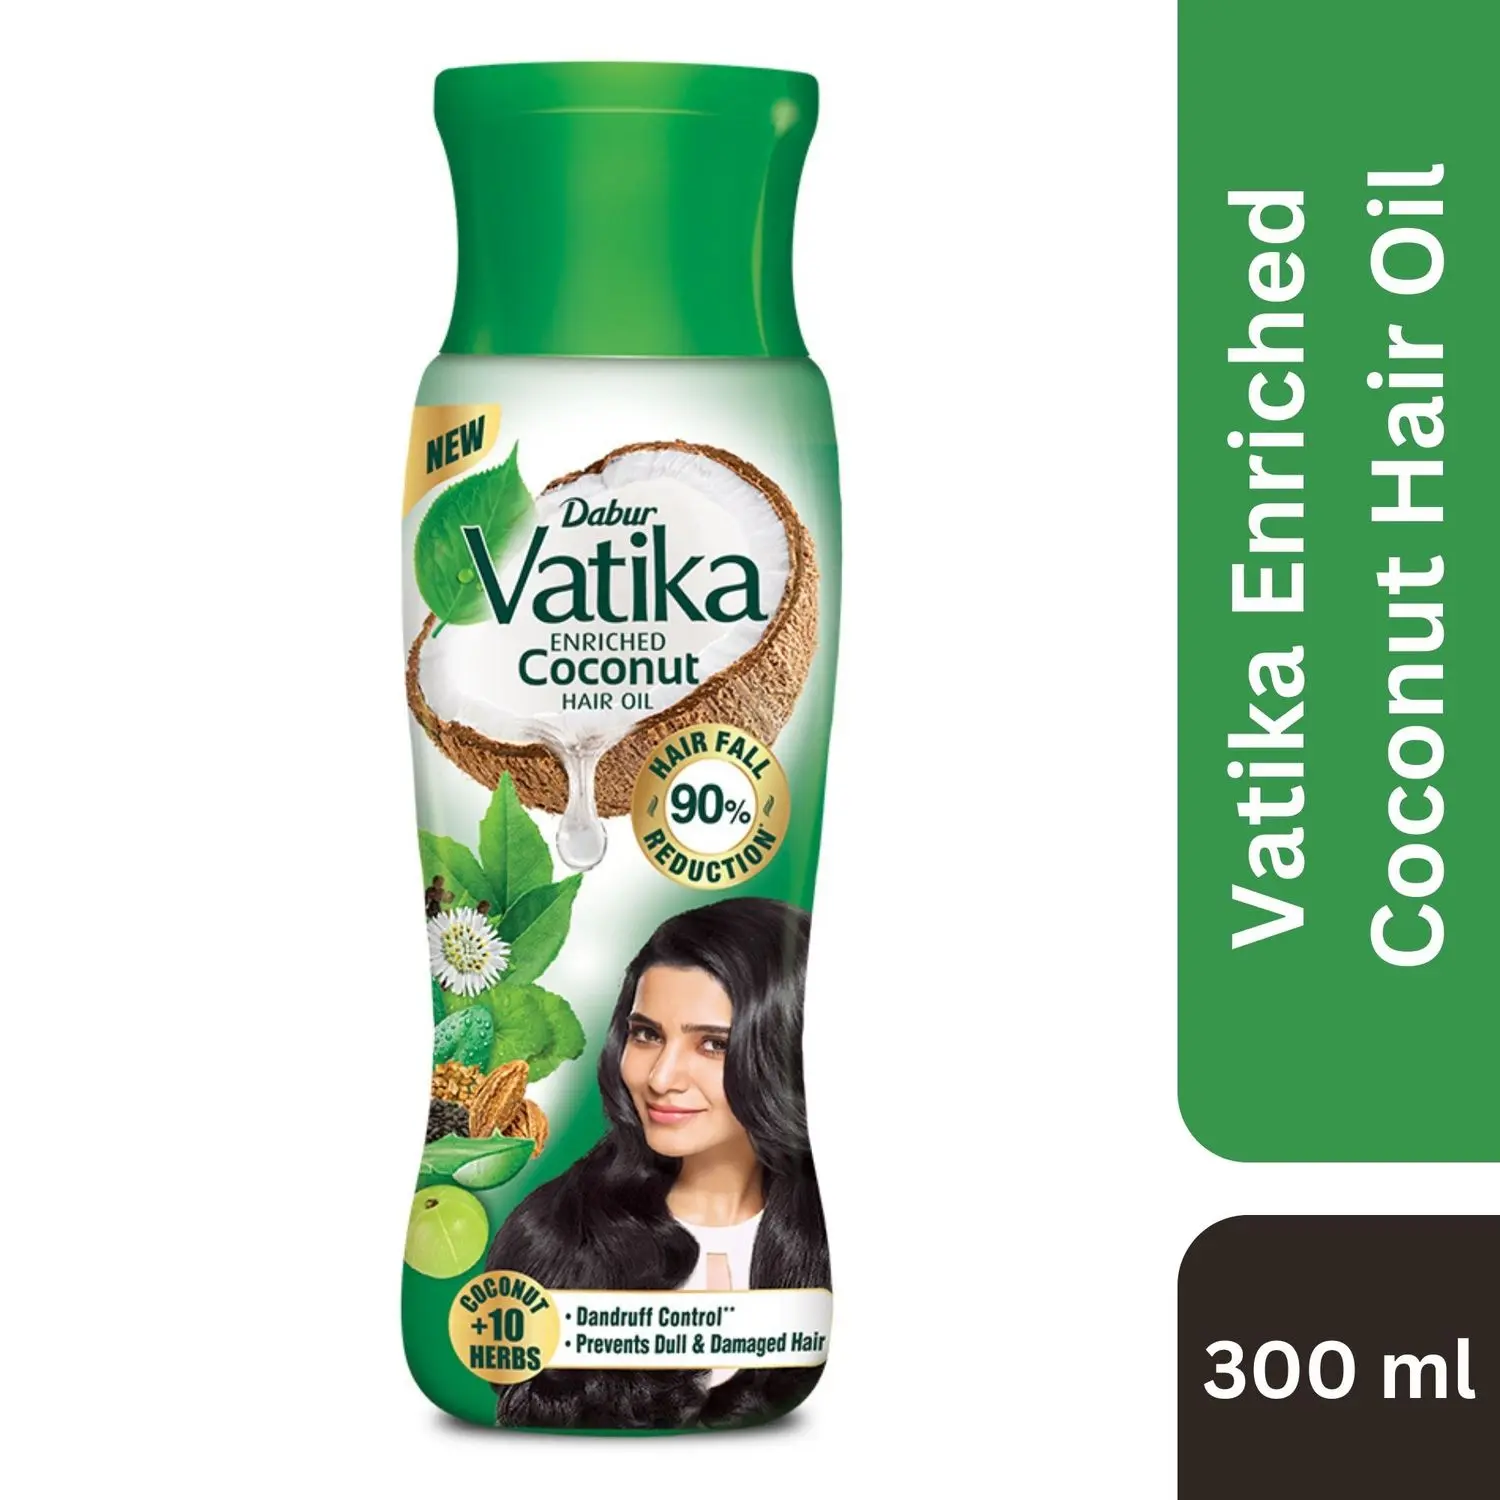 Vatika Enriched Coconut Hair Oil - 300 ml | For Strong, Thick & Shiny Hair | Clinically Tested to Reduce 50% Hairfall in 4 Weeks | Controls Dandruff | Prevents Dull & Damaged Hair | Good for Scalp Health | Enriched with 10 Herbs